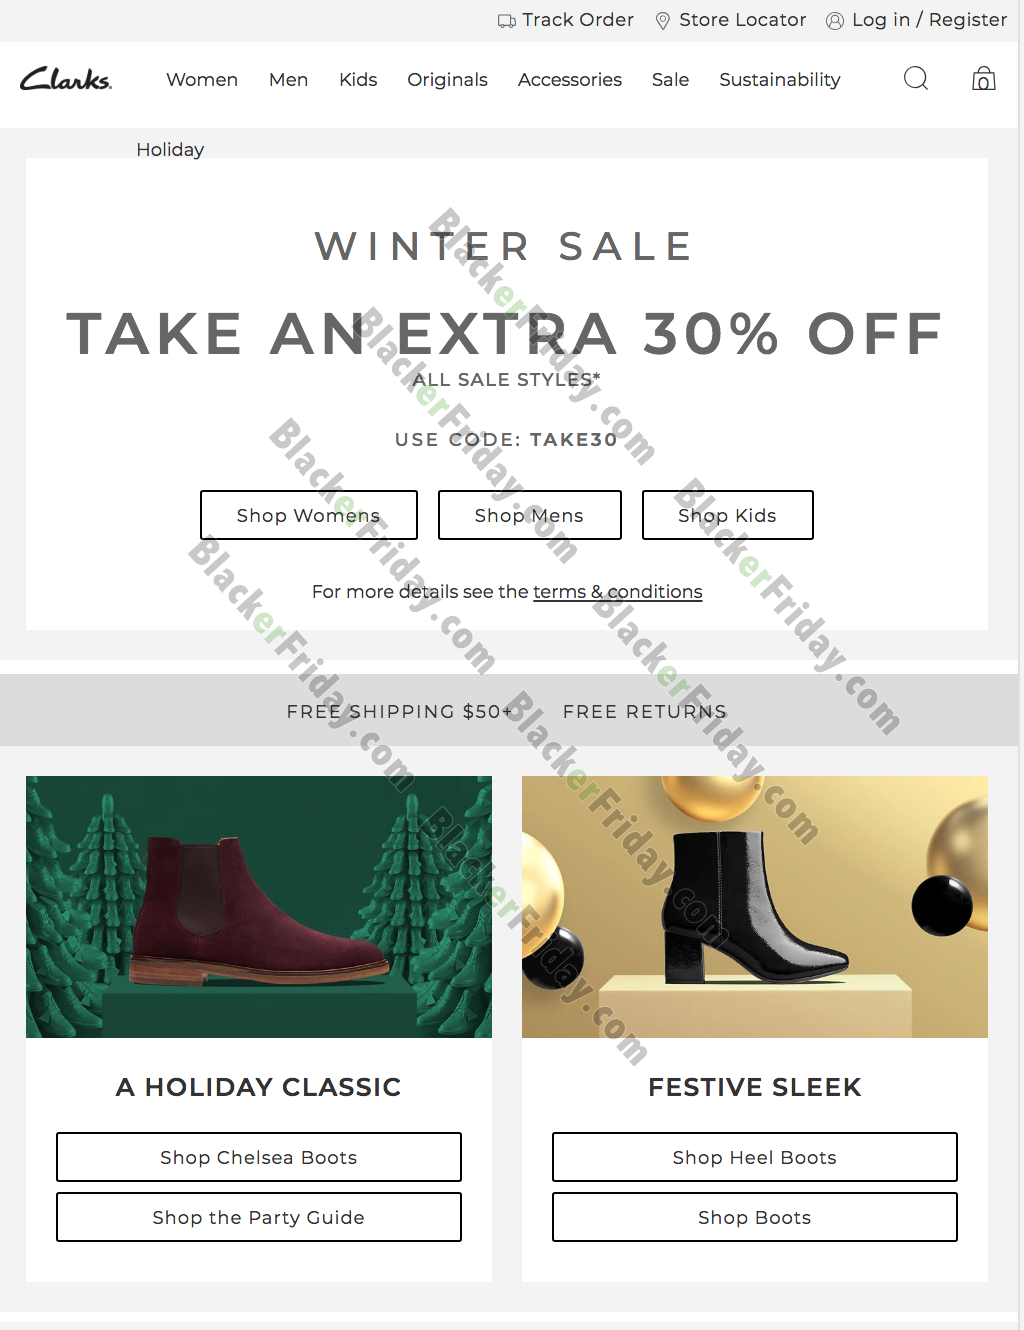 clarks shoes promo code march 2015